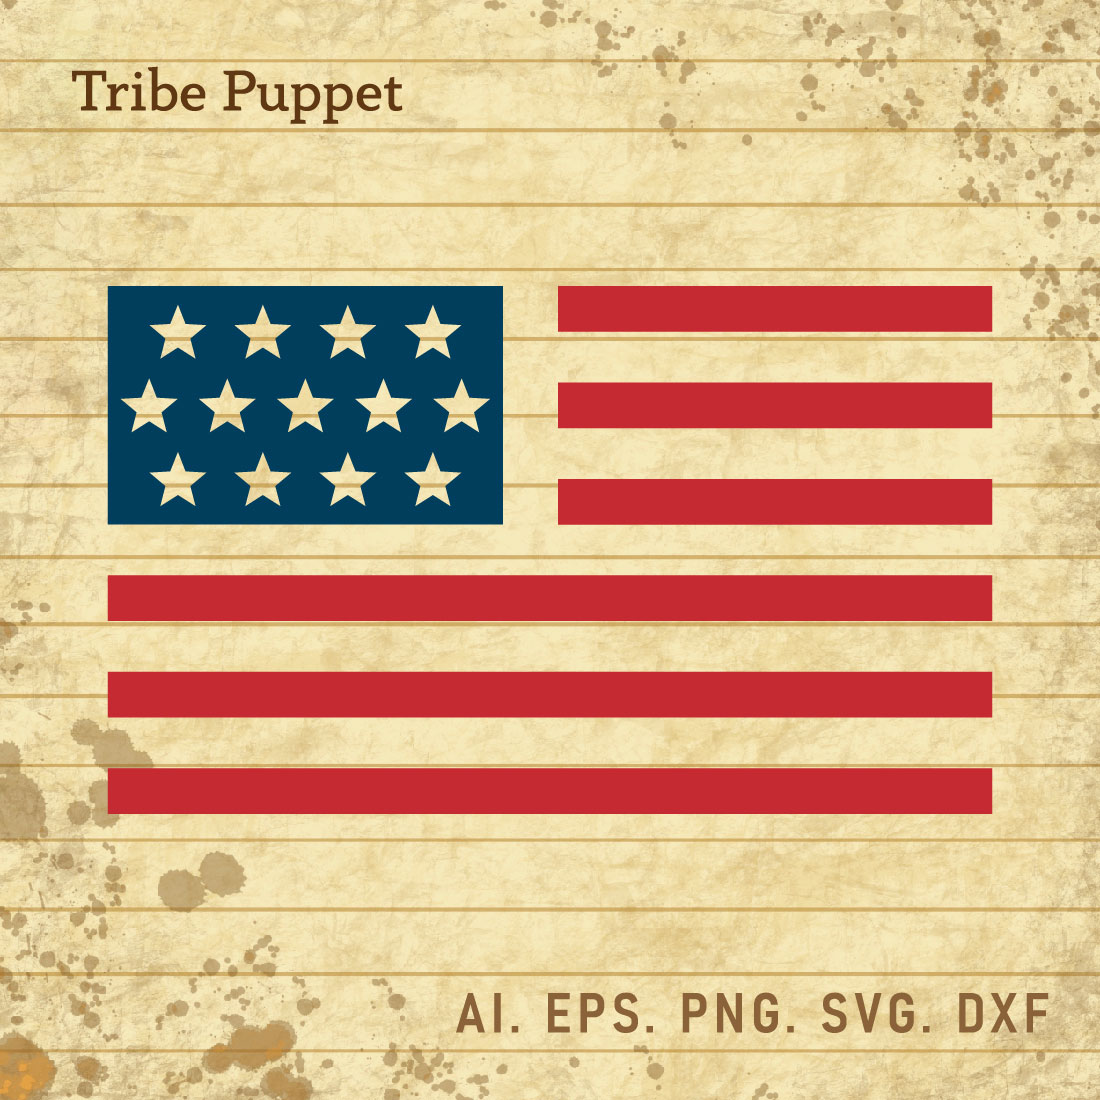 American Flag SVG cover image.